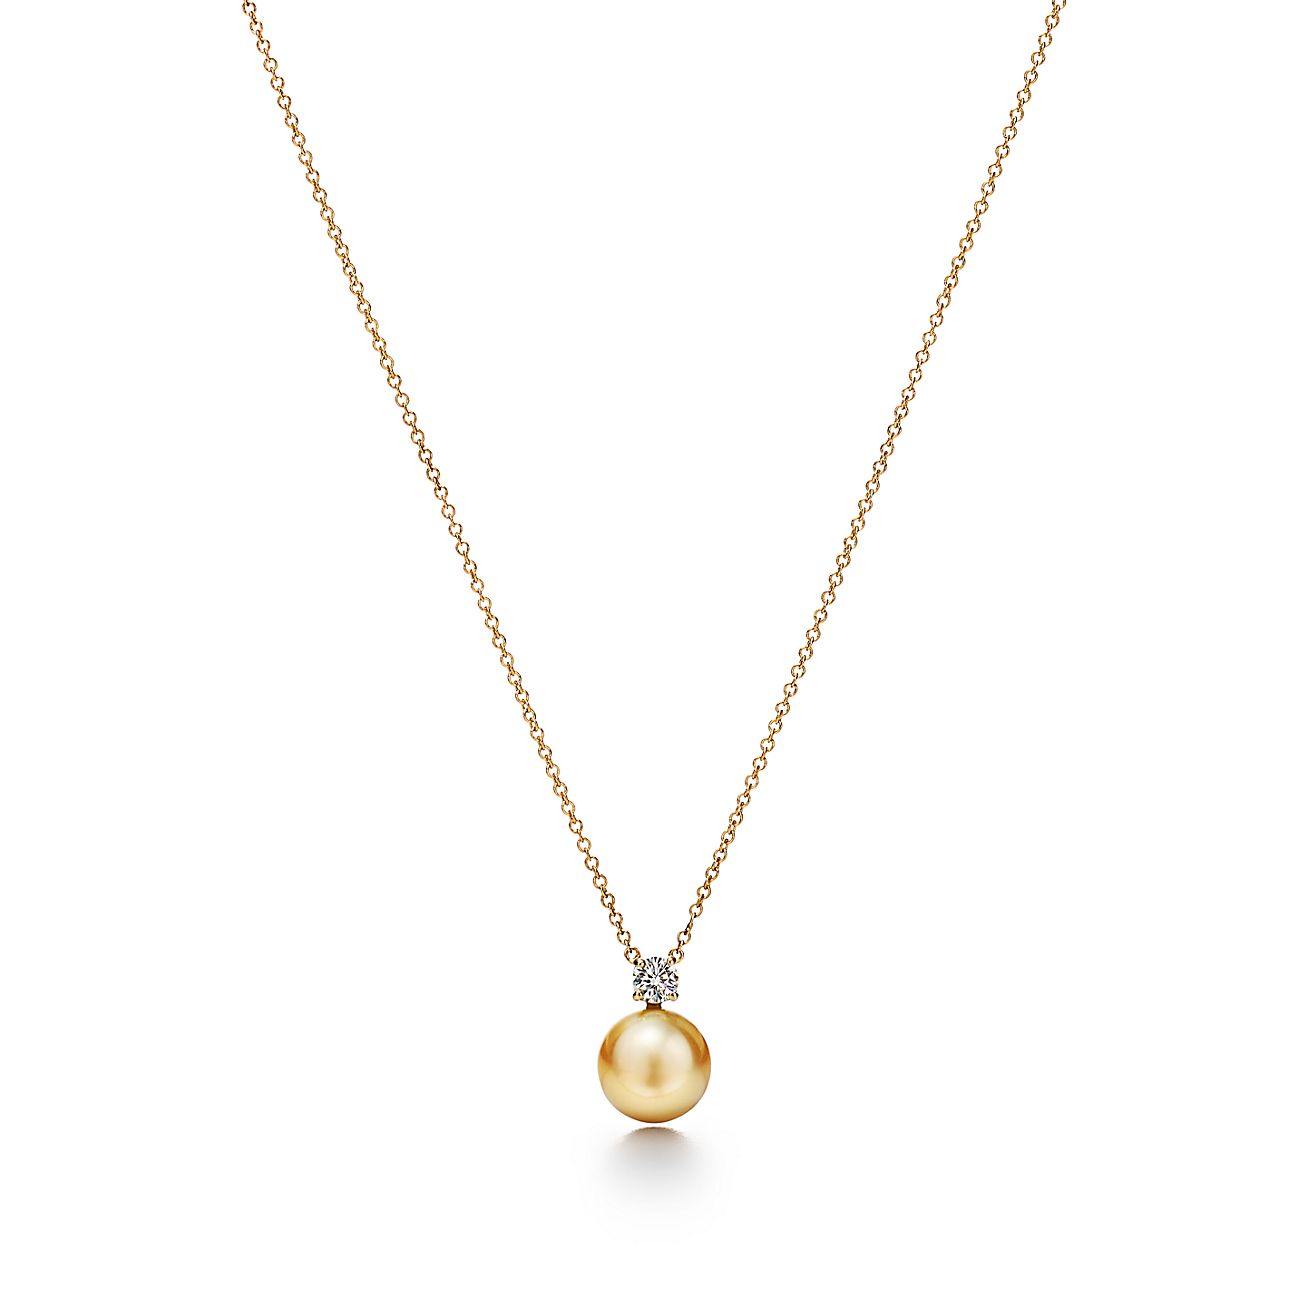 18K Japan gold South sea pearl necklace